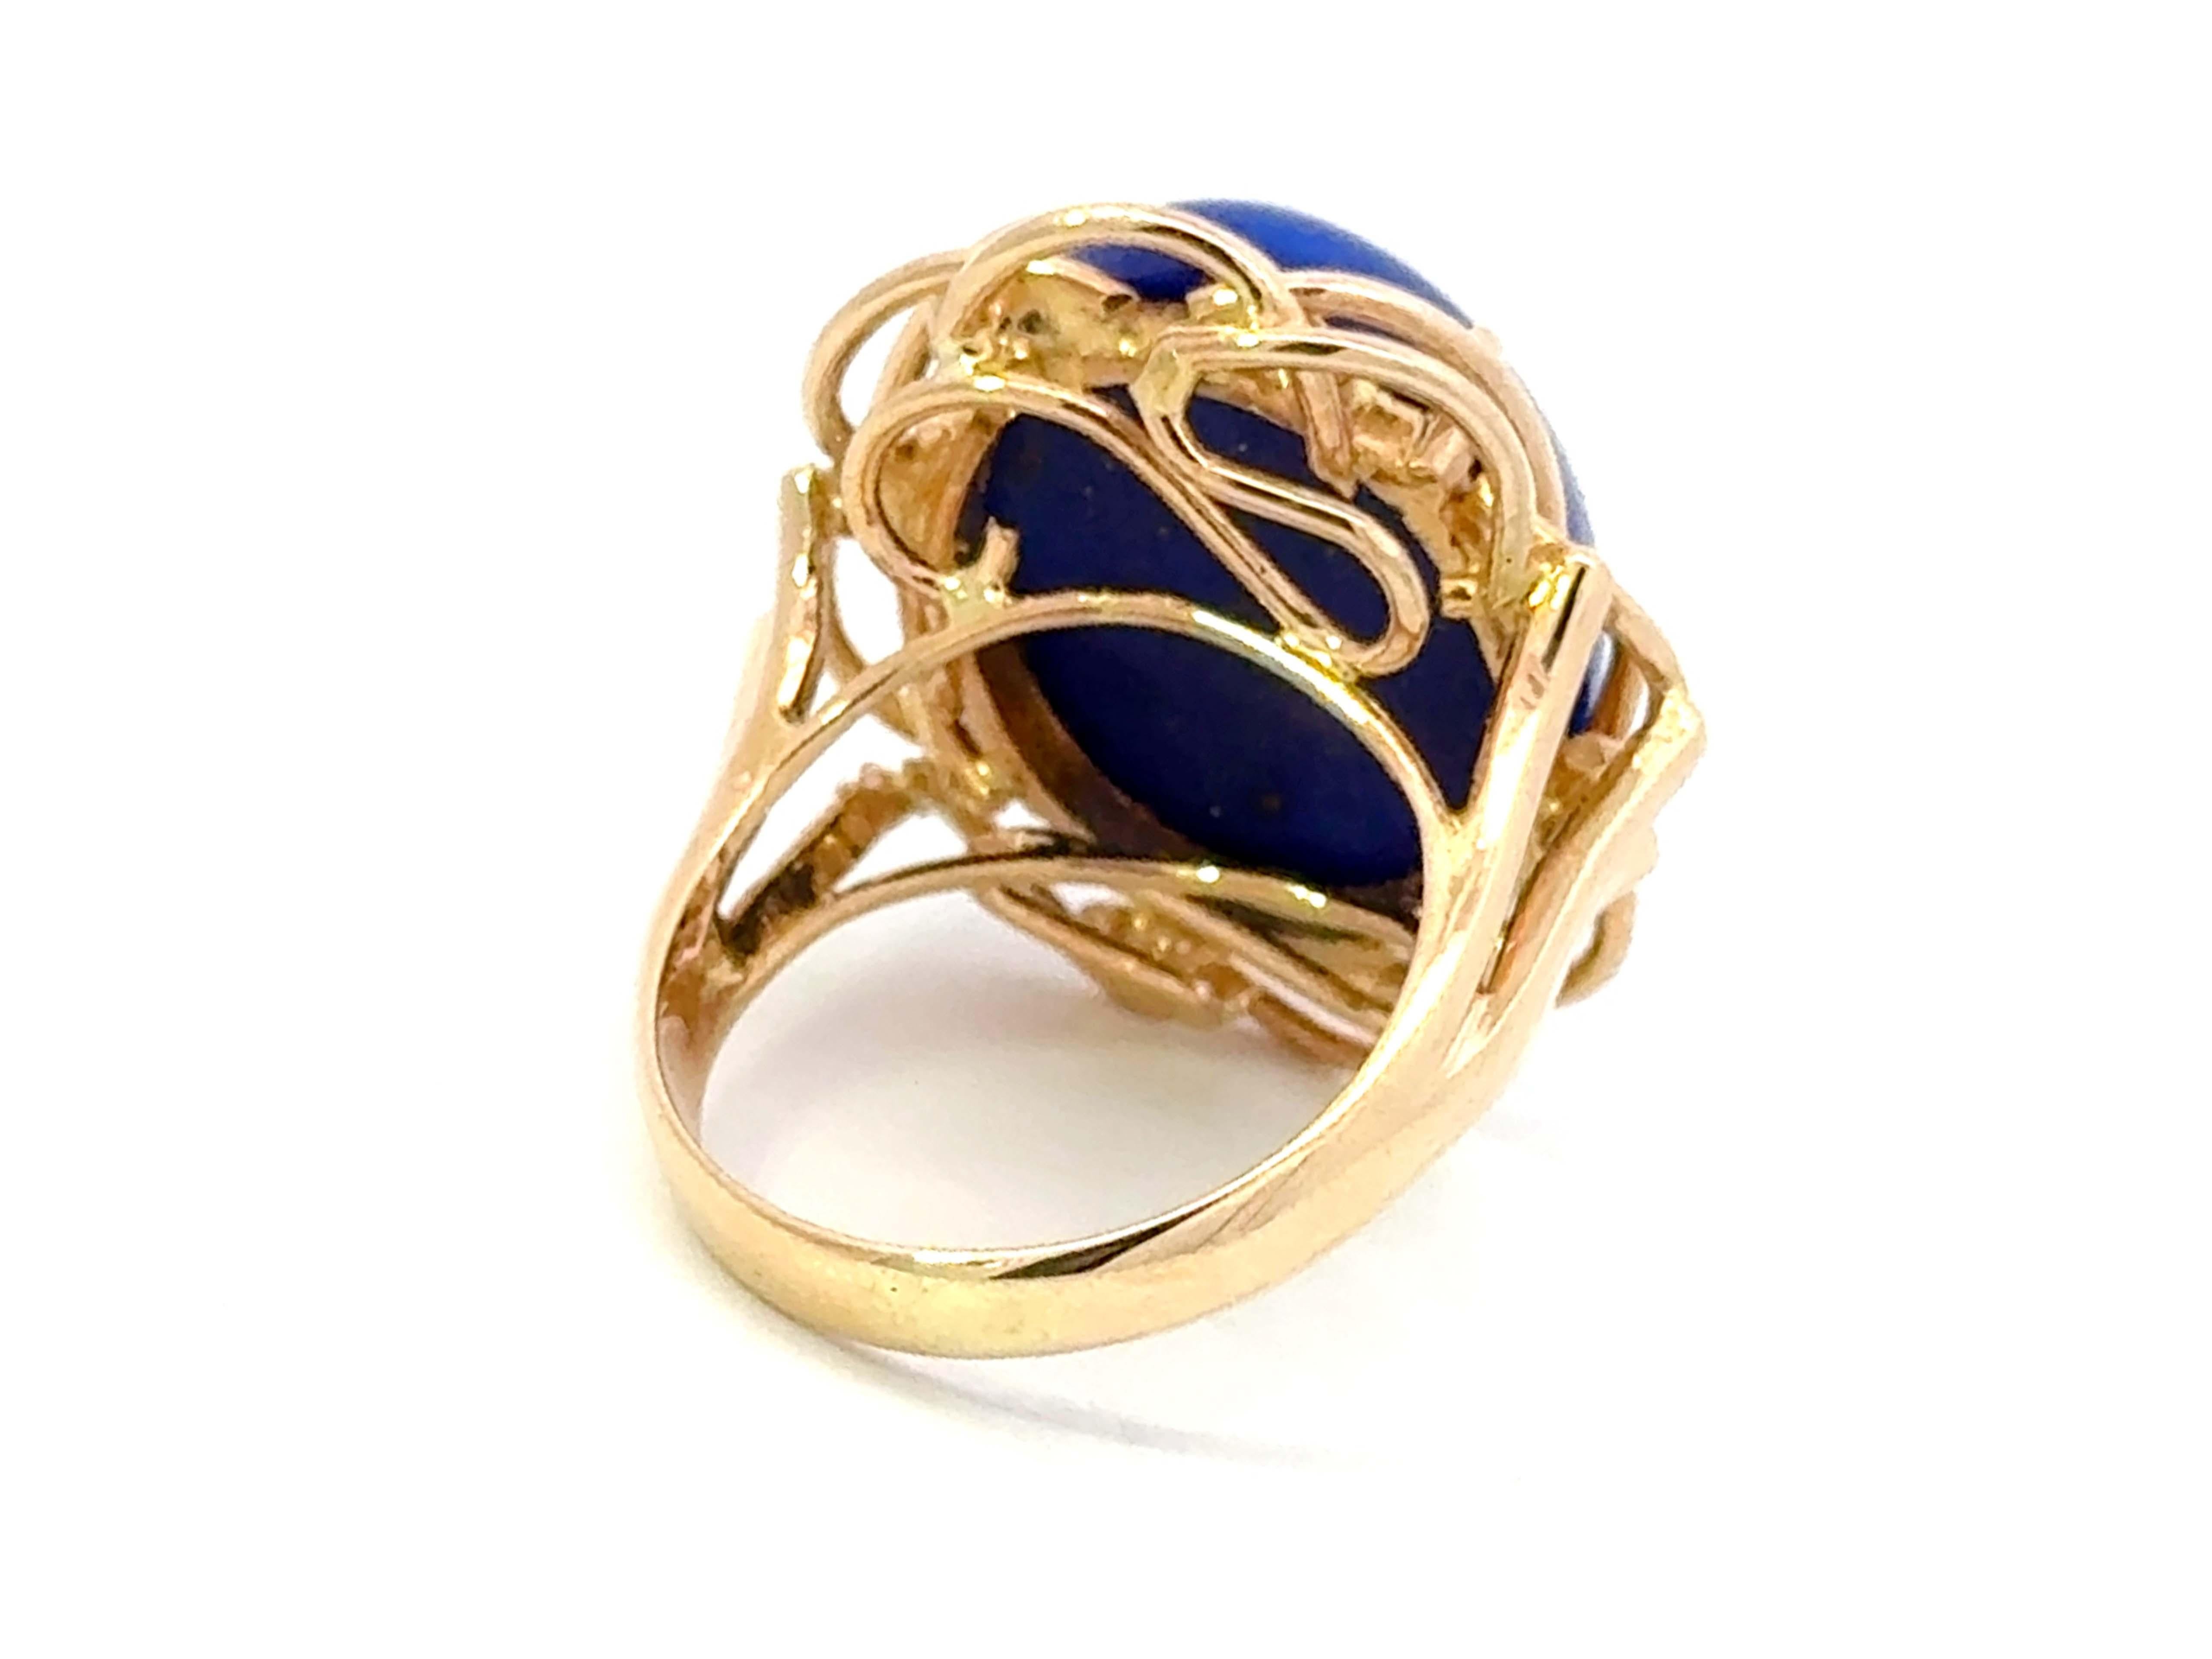 Large Oval Lapis Lazuli Cocktail Ring 14k Yellow Gold For Sale 1